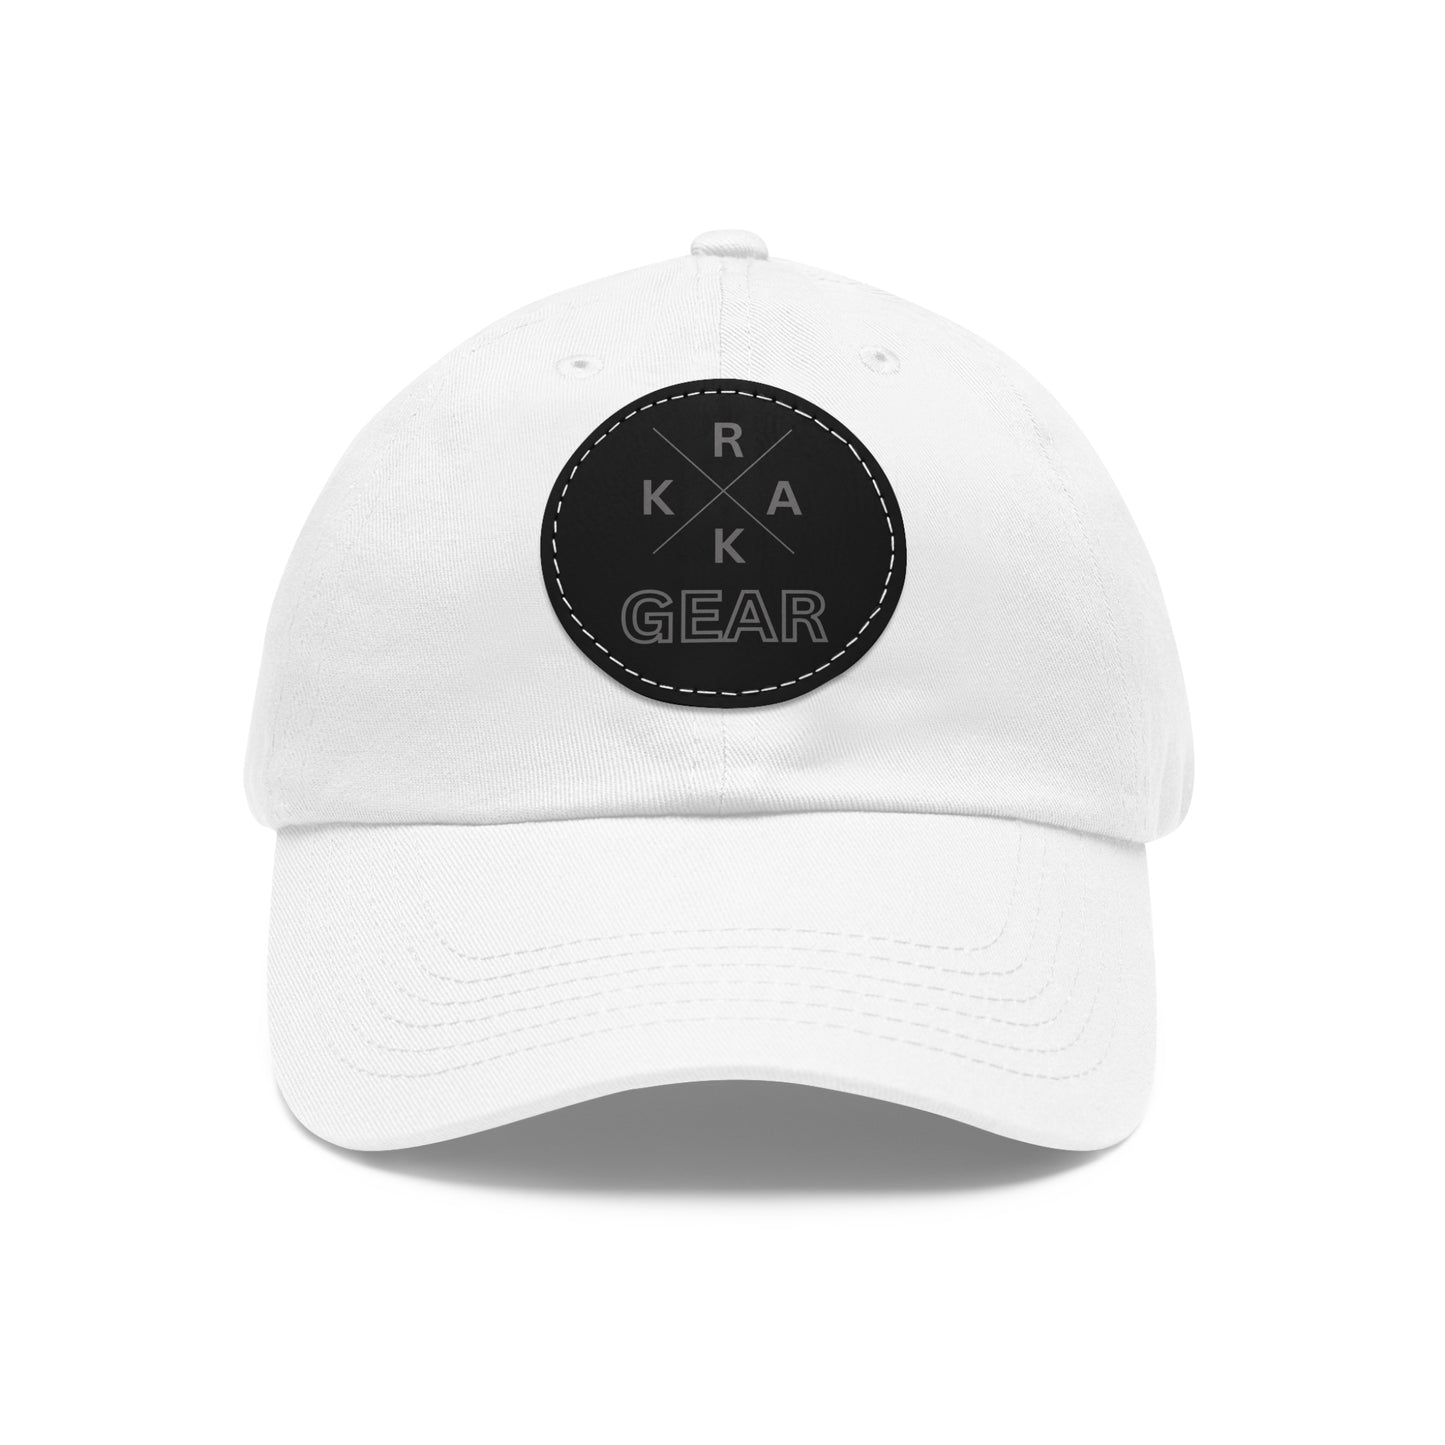 Rakkgear White Hat with Black Leather X Logo Patch: Cap featuring the iconic Rakkgear X Logo on a finely embroidered leather patch on the front